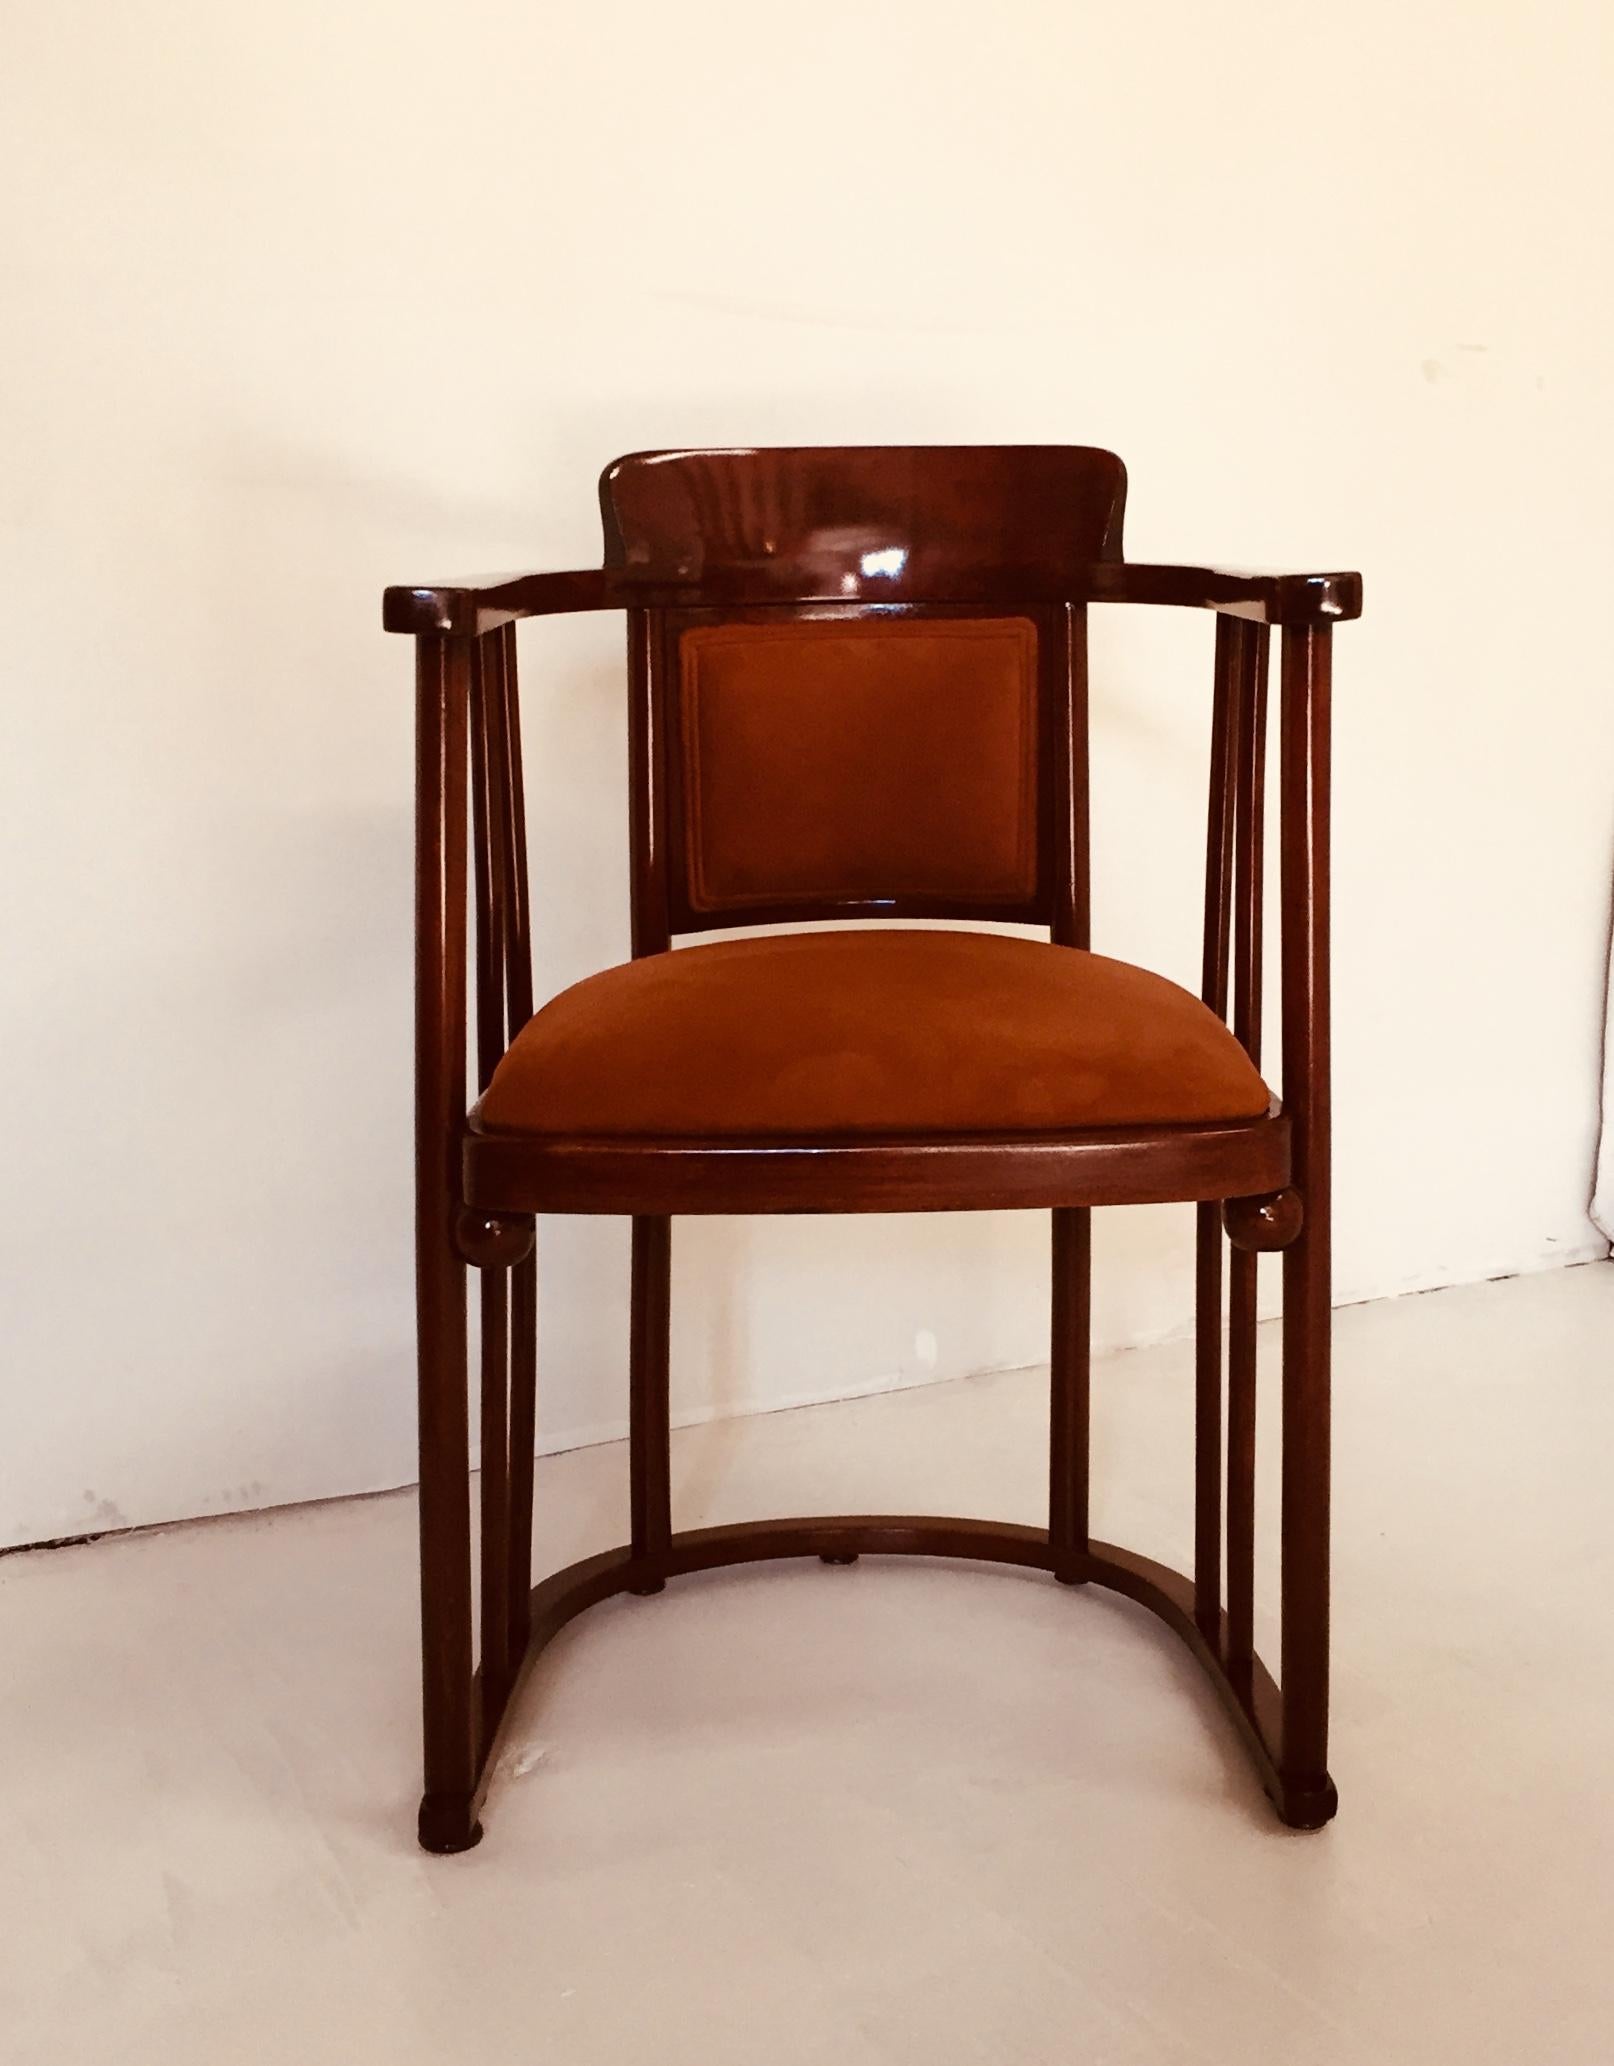 Armchair in solid beech, wood bent Antiques designed by Josef Hoffmann in the early 20th century during the Wiener Werkstatte period, circa 1906.
The original seat piece has been rebuilt because of the bad condition of the original seat.
The frame